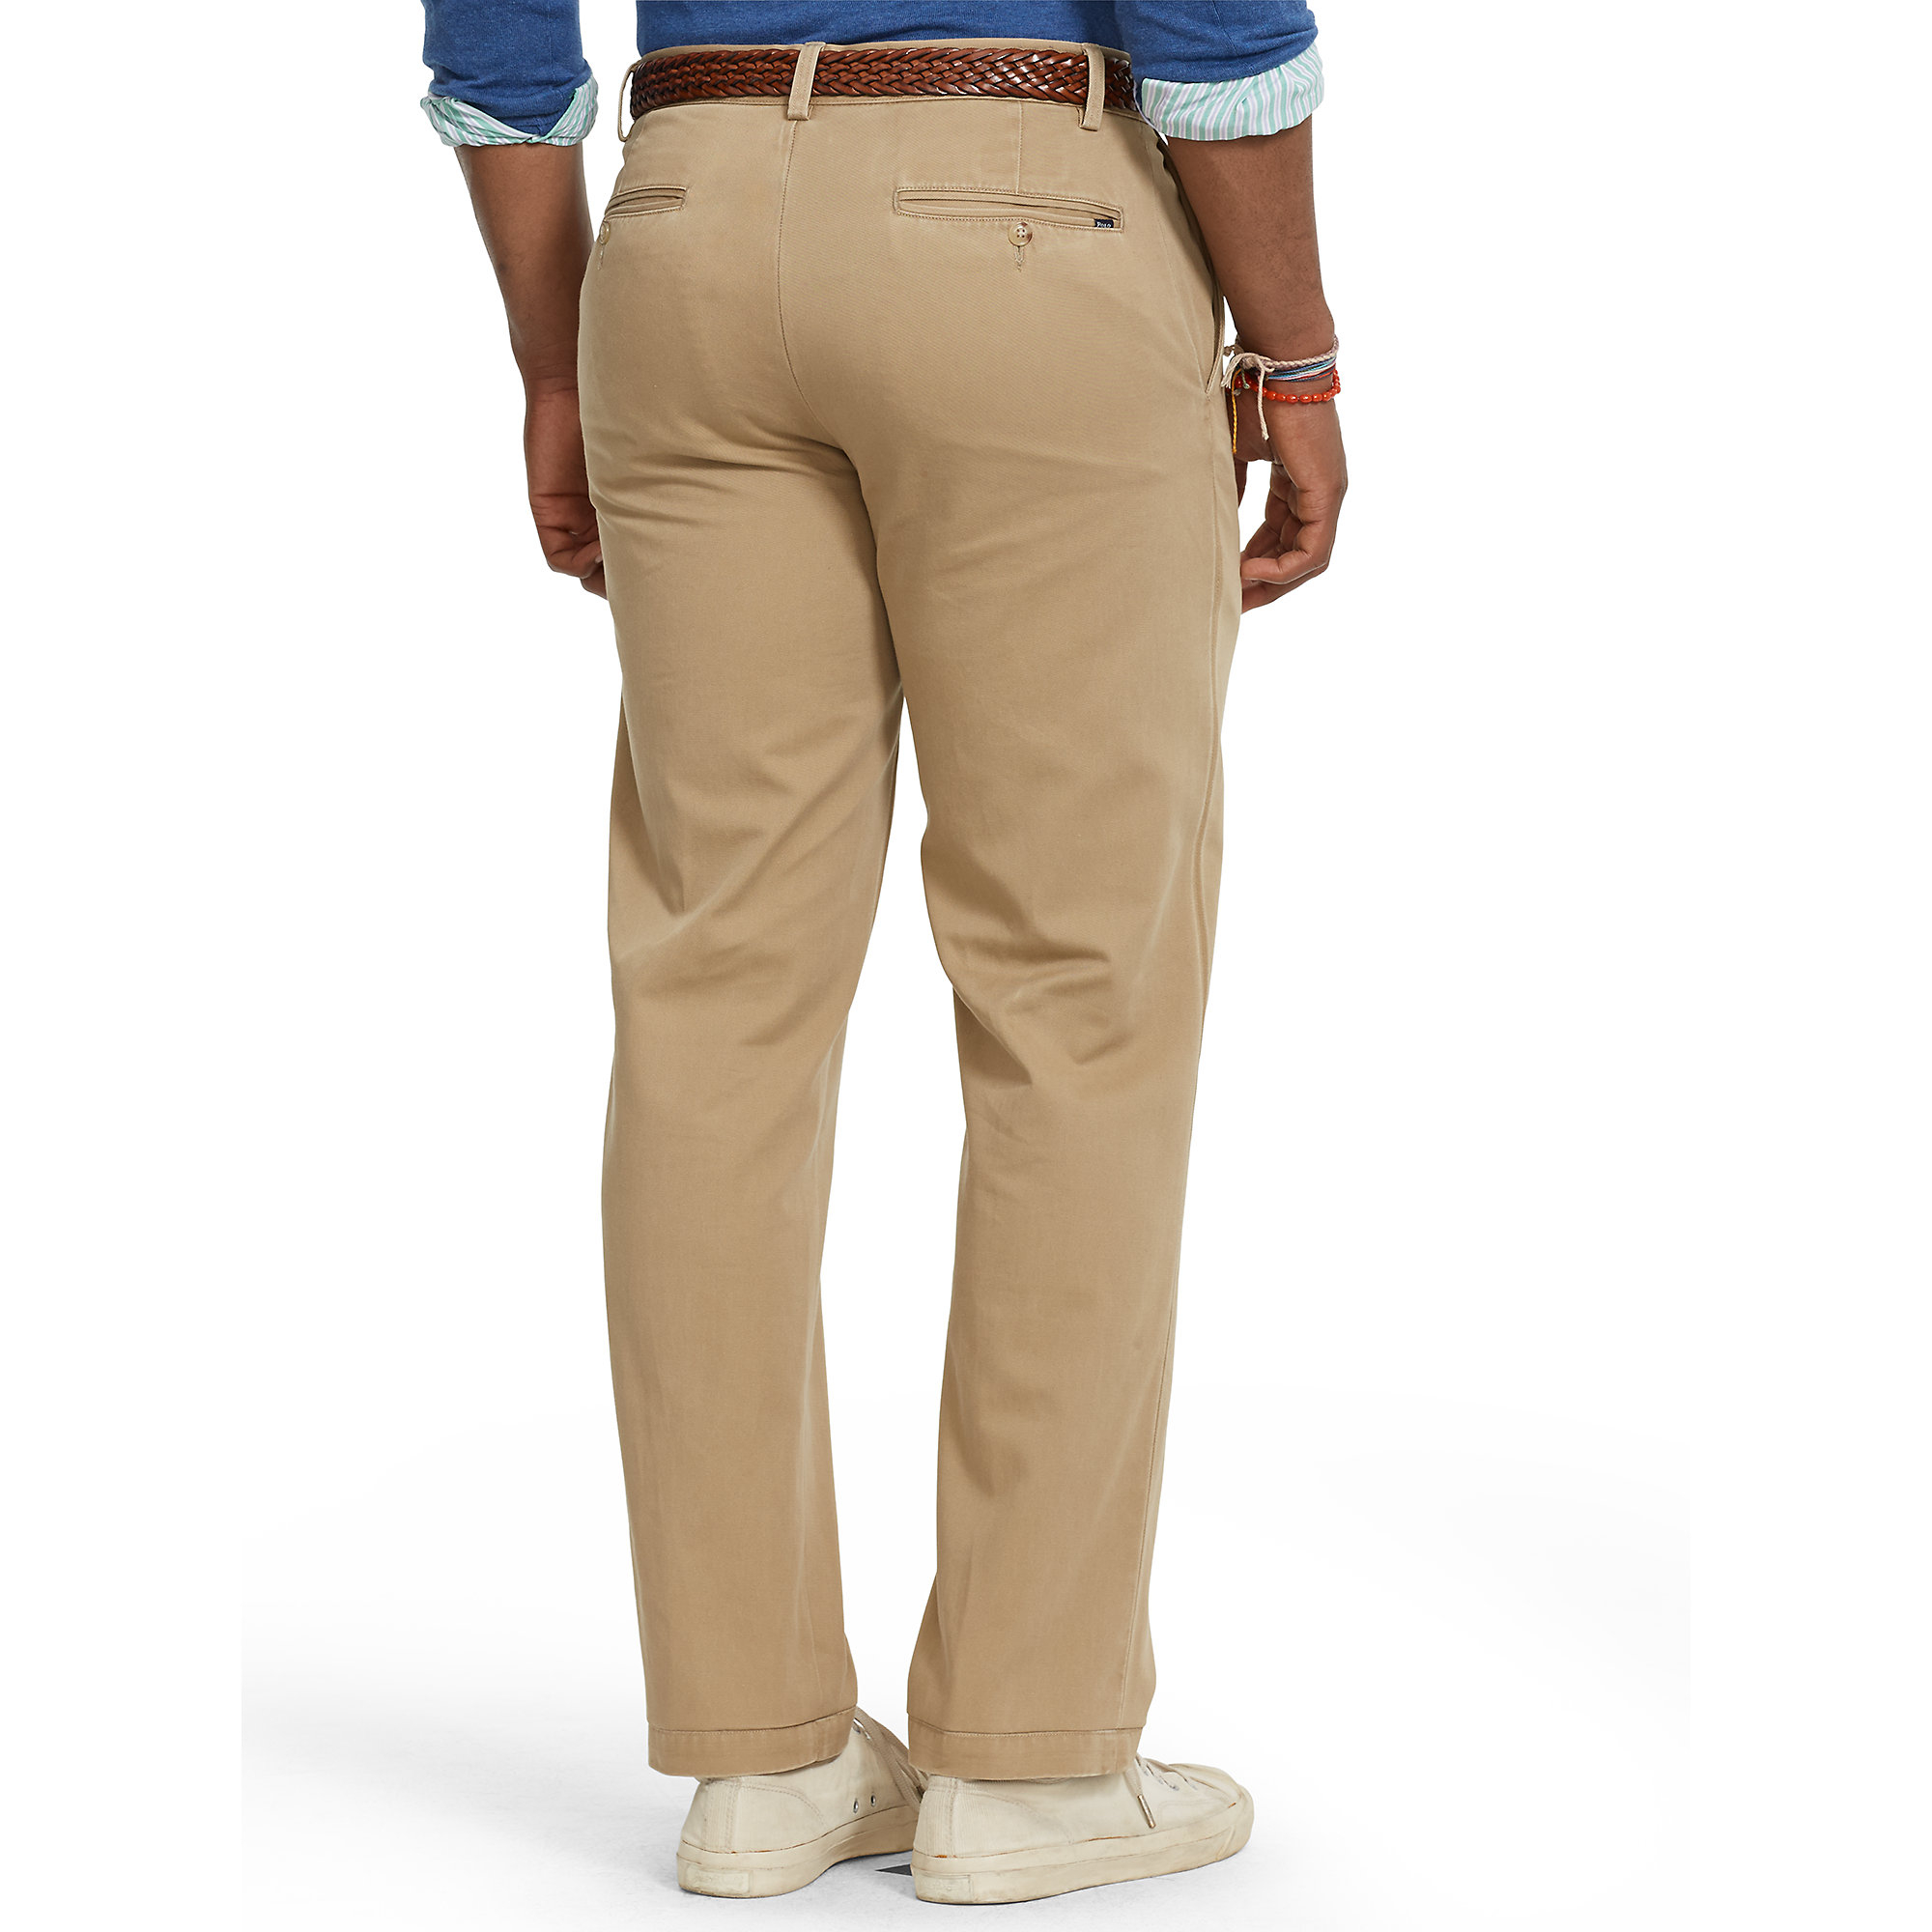 Polo Ralph Lauren Classic-Fit Preppy Chino in Natural for Men - Lyst